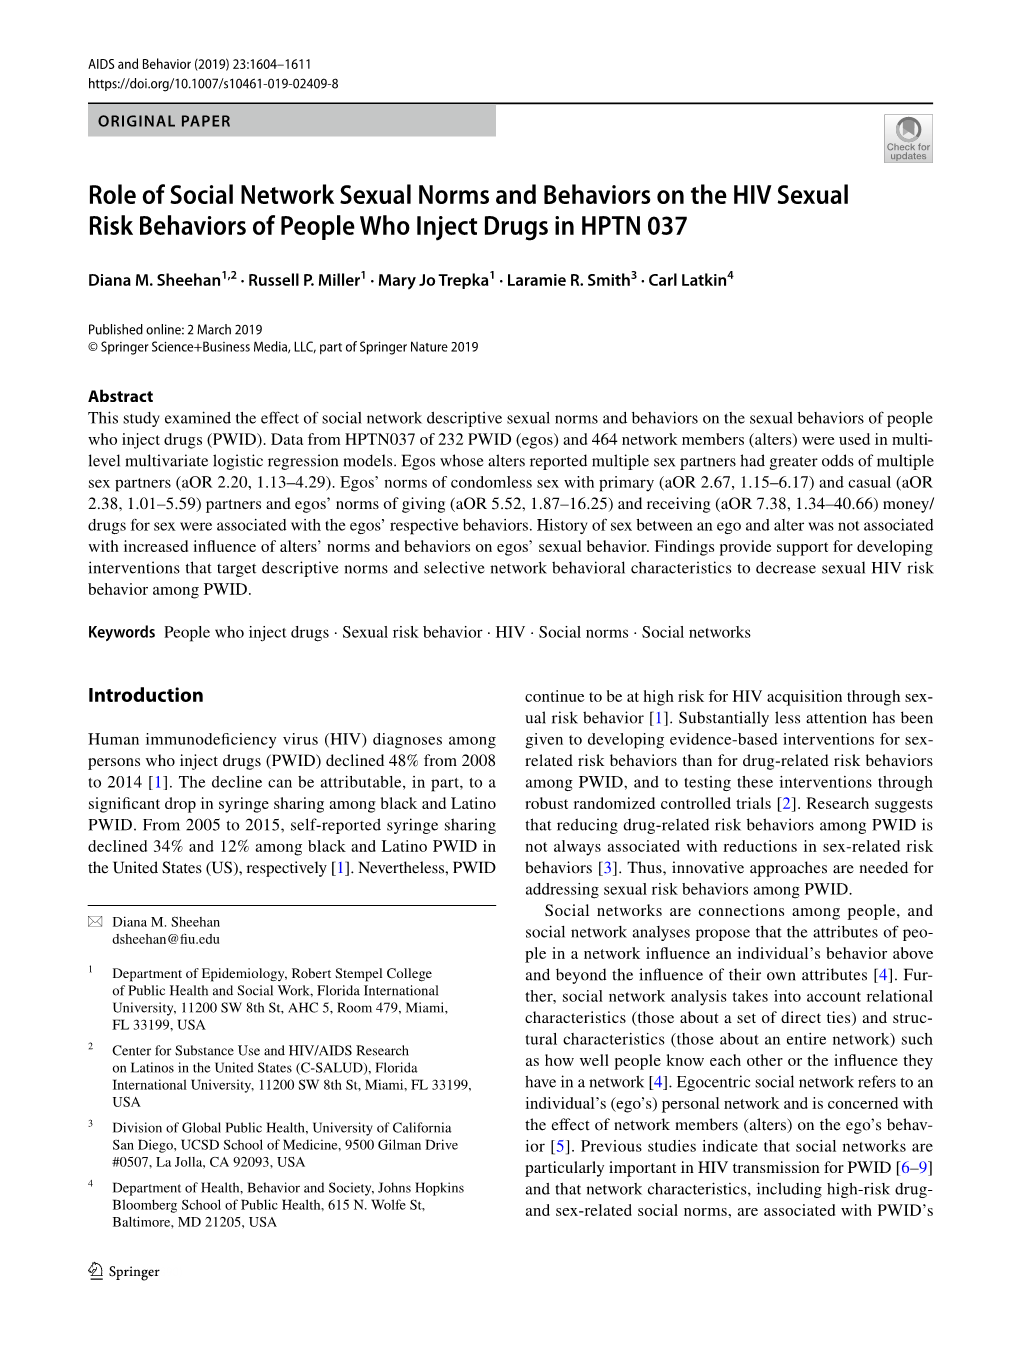 Role of Social Network Sexual Norms and Behaviors on the HIV Sexual Risk Behaviors of People Who Inject Drugs in HPTN 037